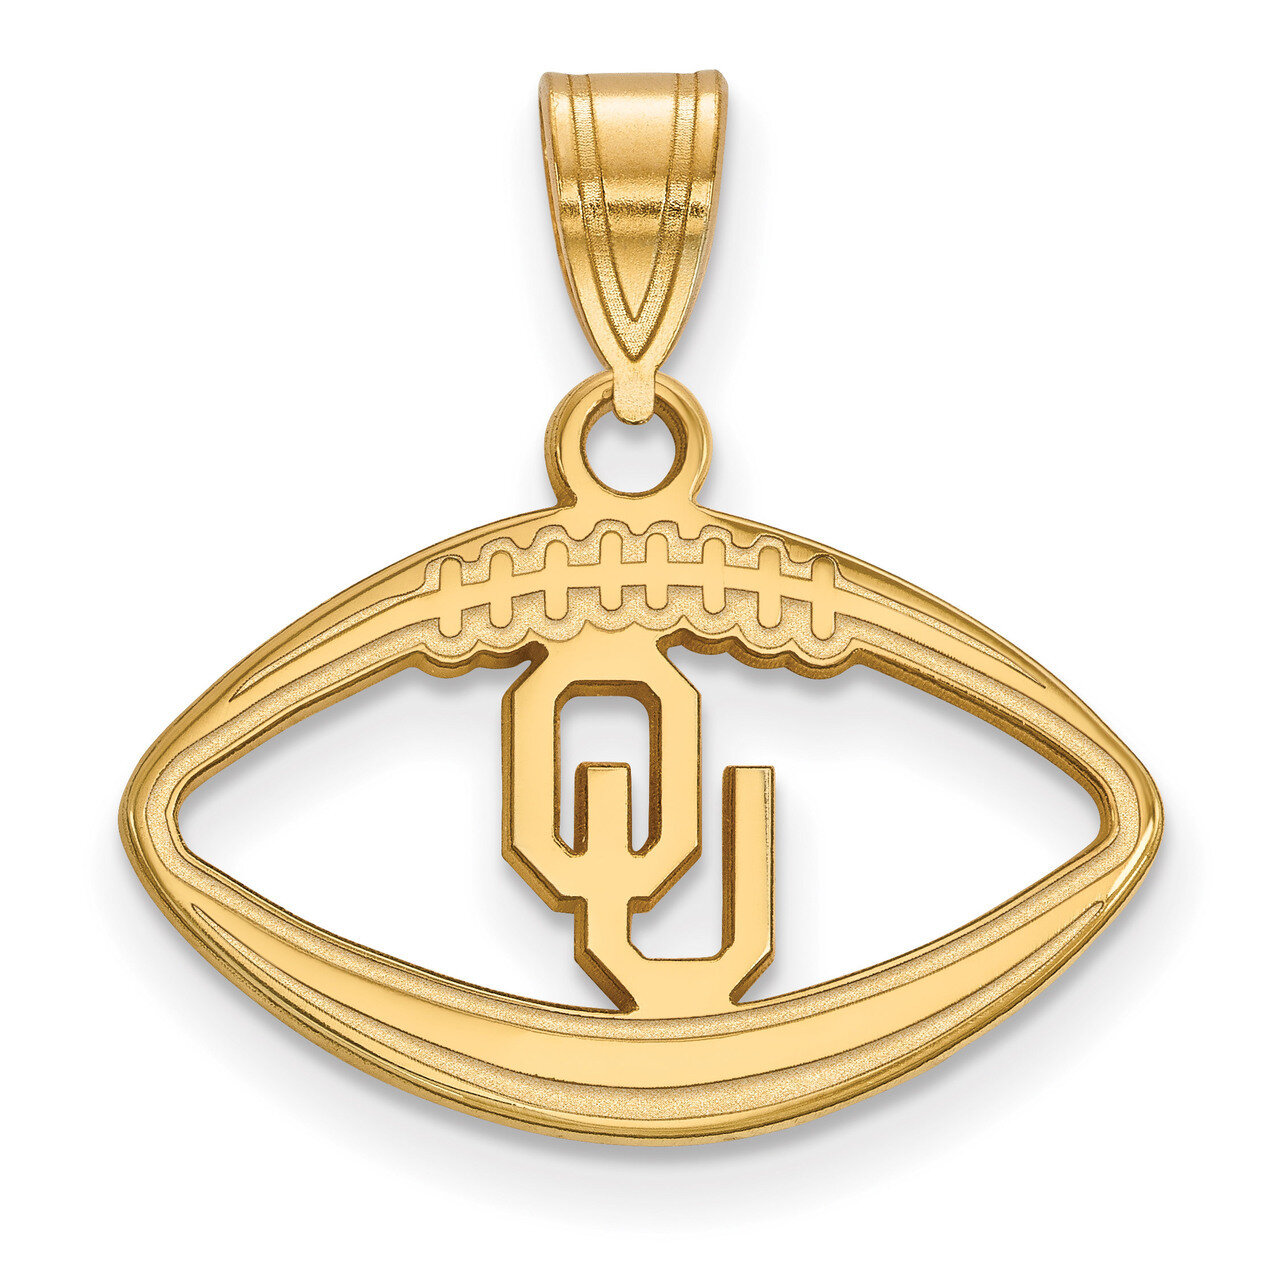 University of Oklahoma Pendant in Football Gold-plated Sterling Silver GP019UOK